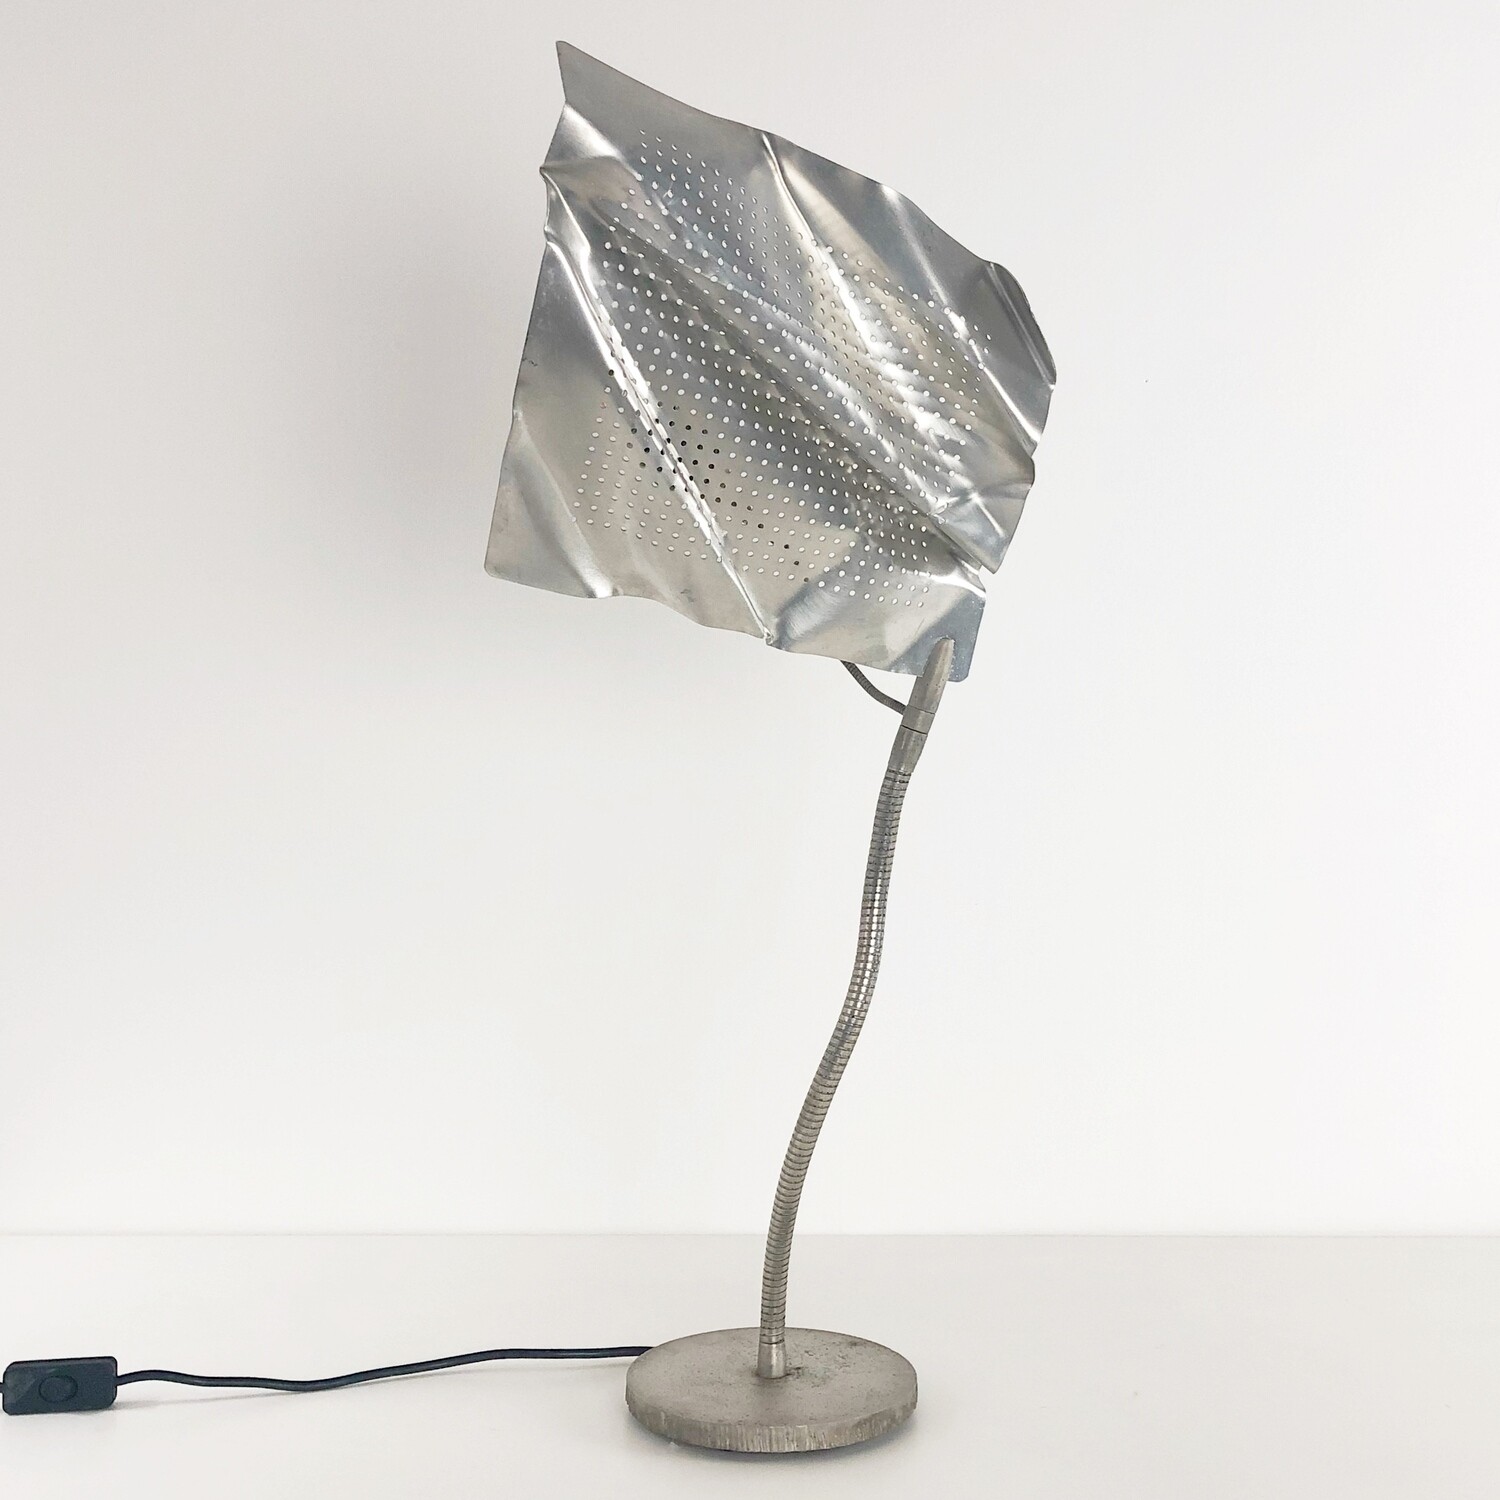 Table lamp inspired by Cattelani &amp; Smith